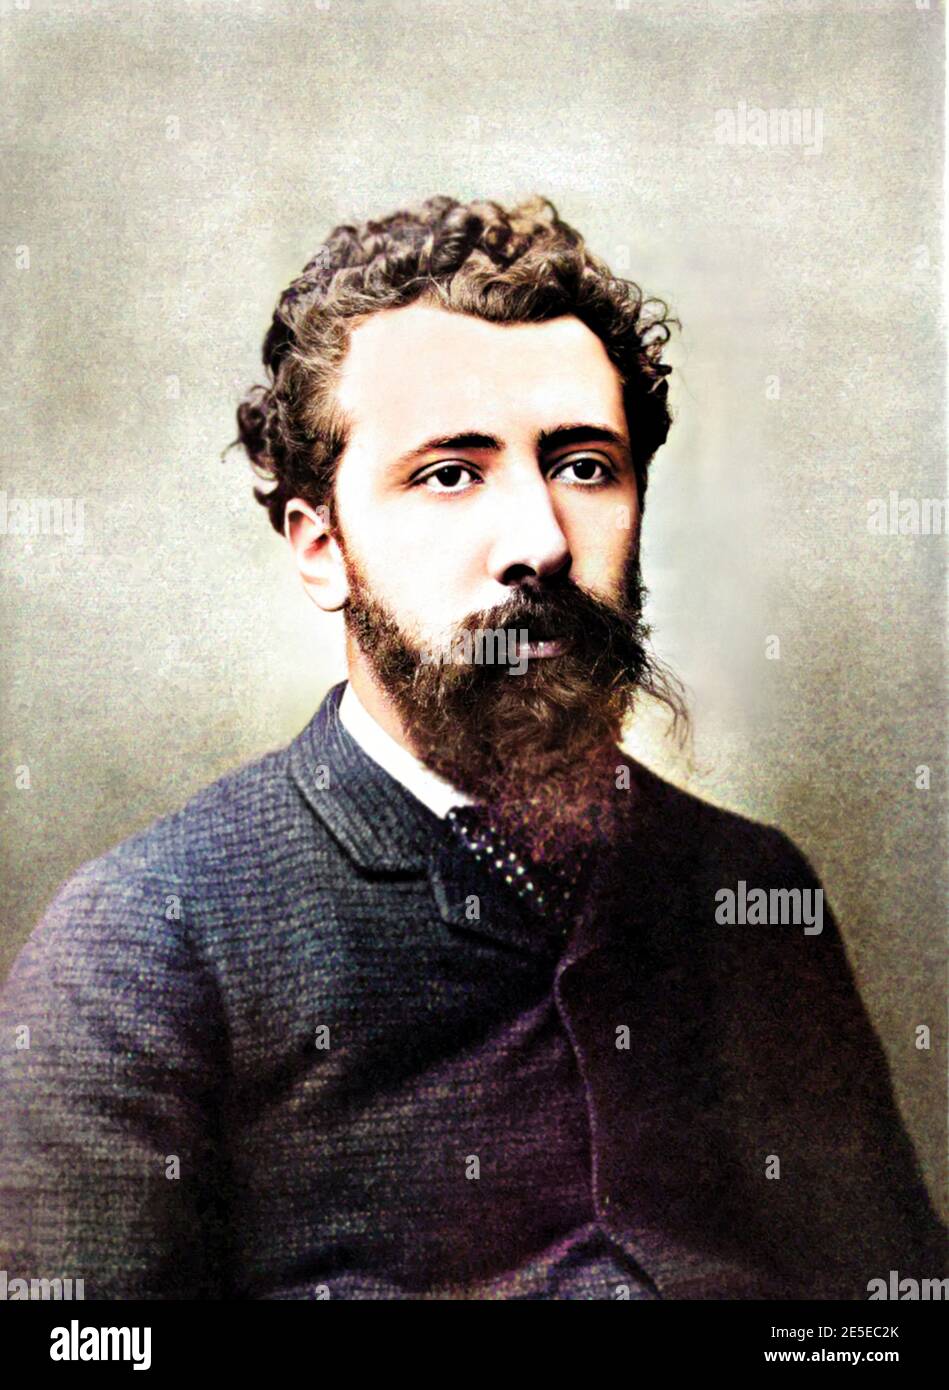 1890 ca , Paris , FRANCE : The  french  Impressioniste painter GEORGES SEURAT ( 1859 - 1891 ). Portrait by unknown photographer . DIGITALLY COLORIZED . - ARTS - ARTE - PITTURA - painting - PITTORE - artist - artista - portrait - ritratto - IMPRESSIONISTA - IMPRESSIONISMO - POINTINISME - DIVISIONISMO - DIVISIONISTA - IMPRESSIONISME - beard - barba - HISTORY - FOTO STORICHE --- ARCHIVIO GBB Stock Photo